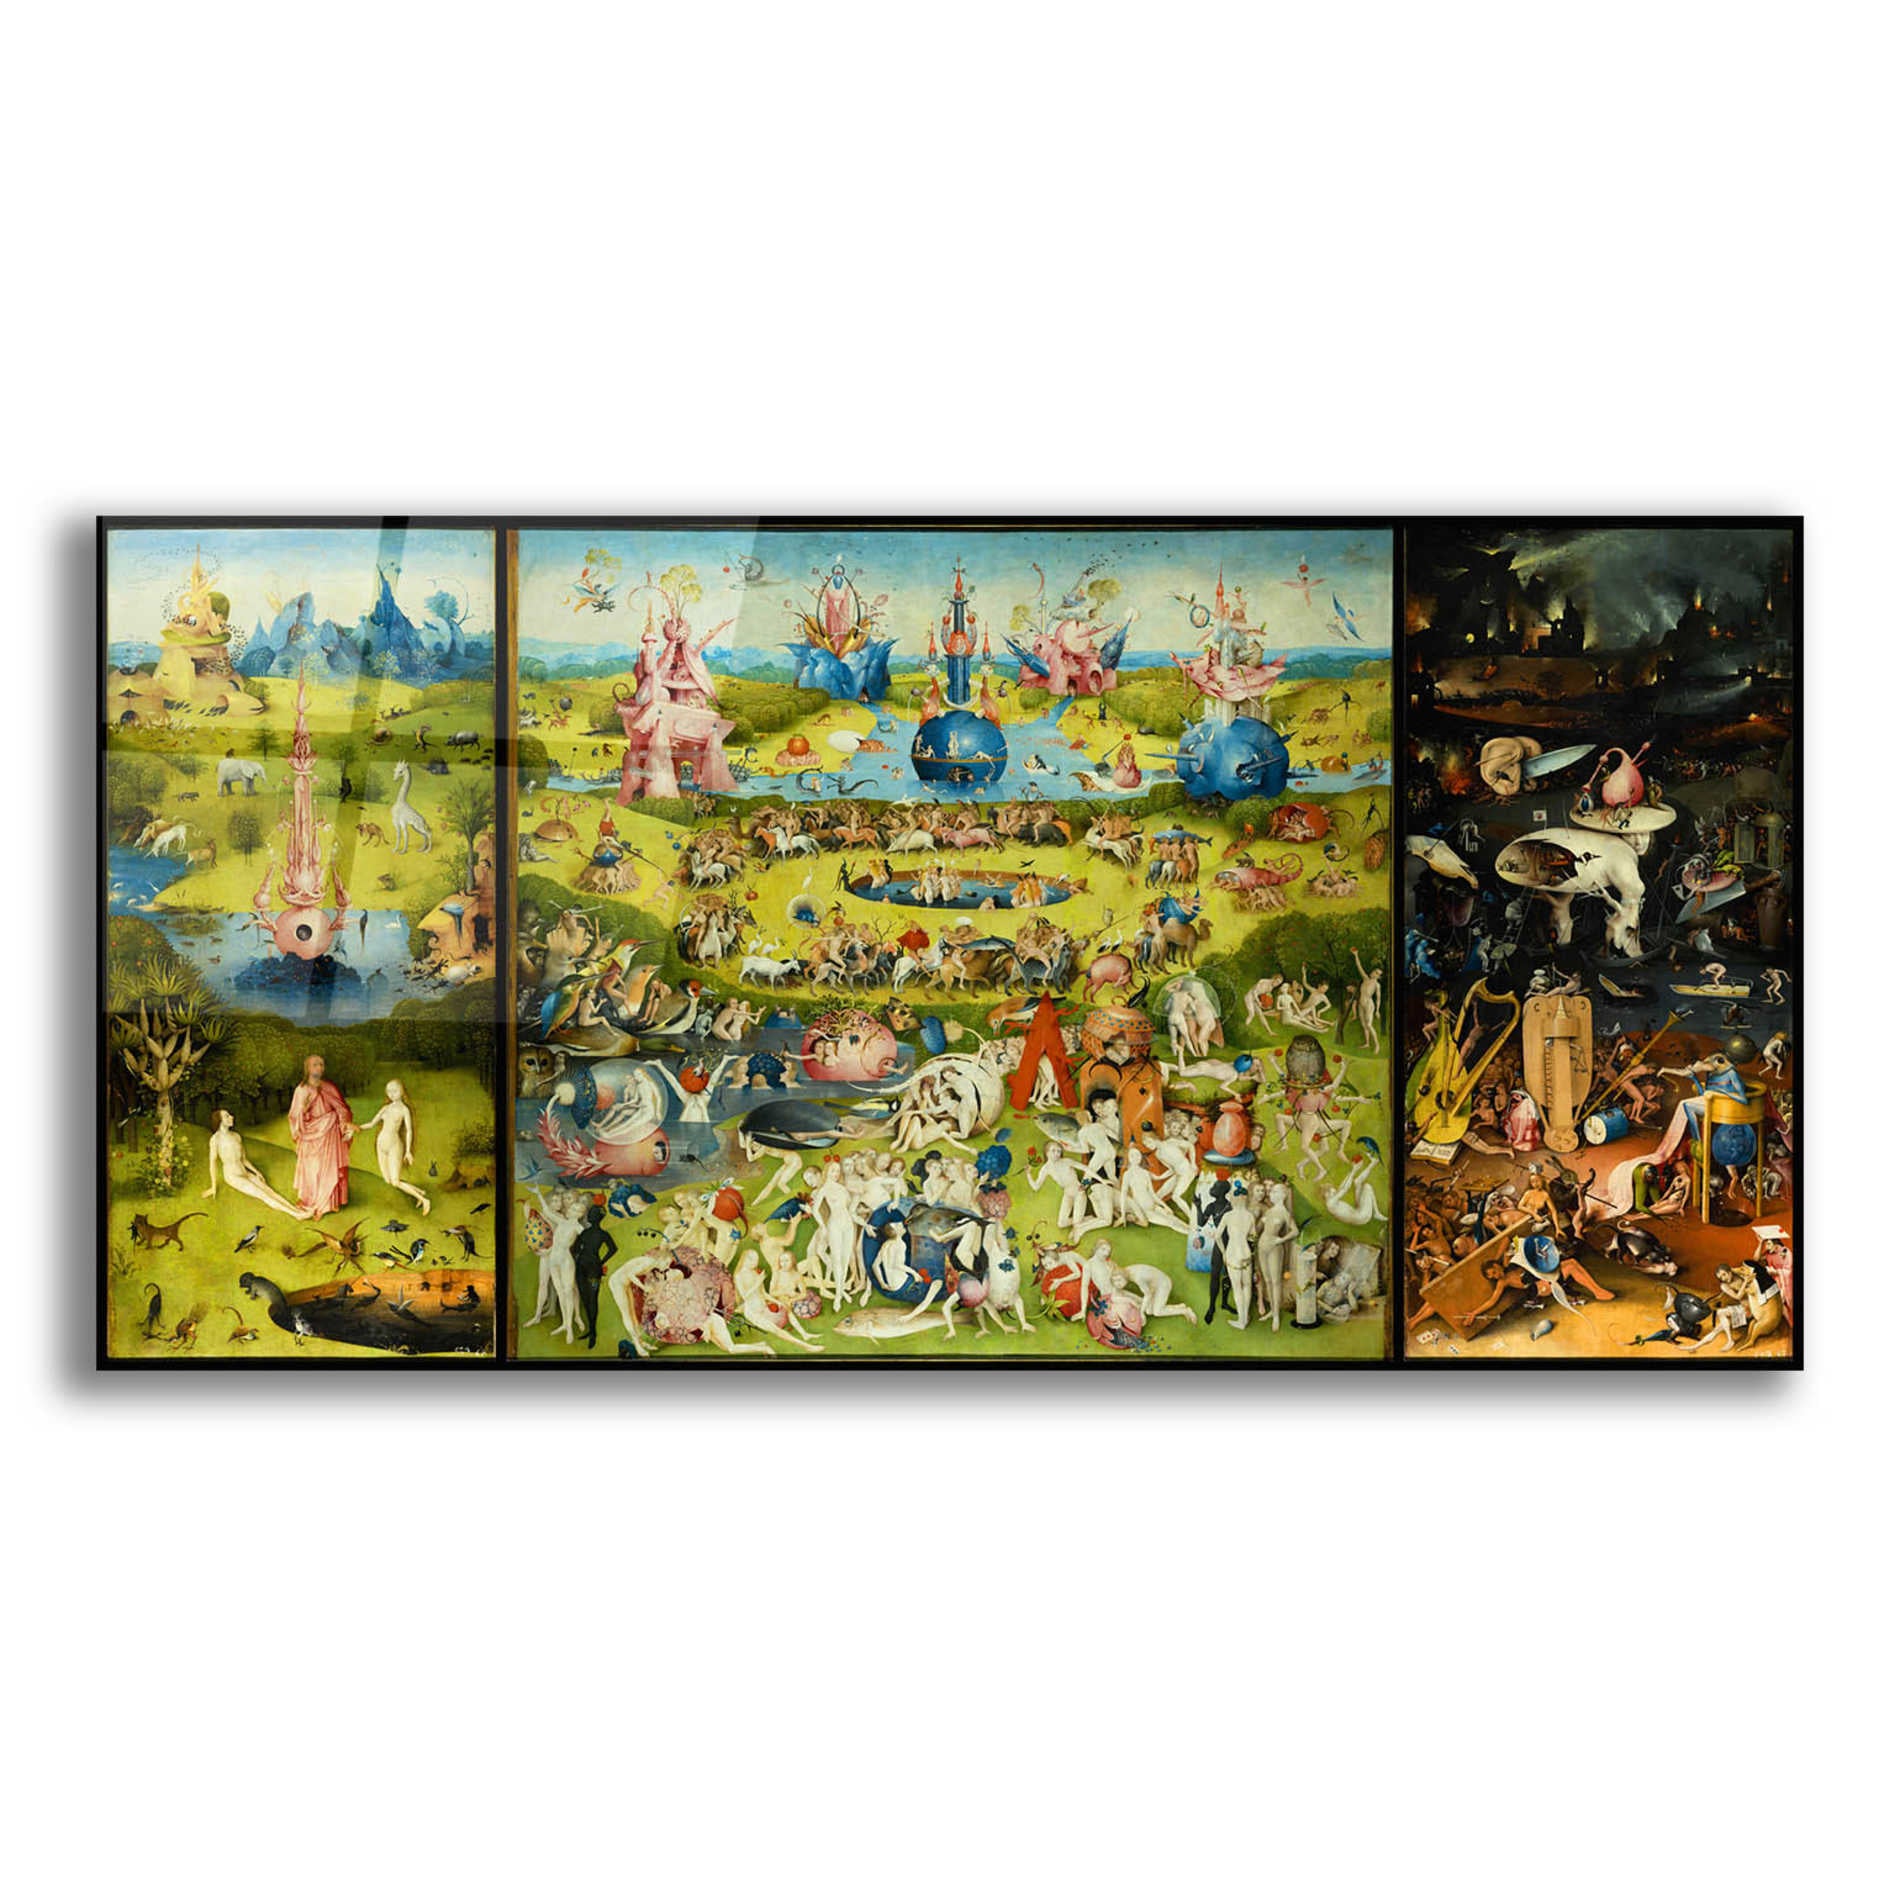 Epic Art 'The Garden of Earthly Delights - Triptych' by Hieronymus Bosch, Acrylic Glass Wall Art,2:1